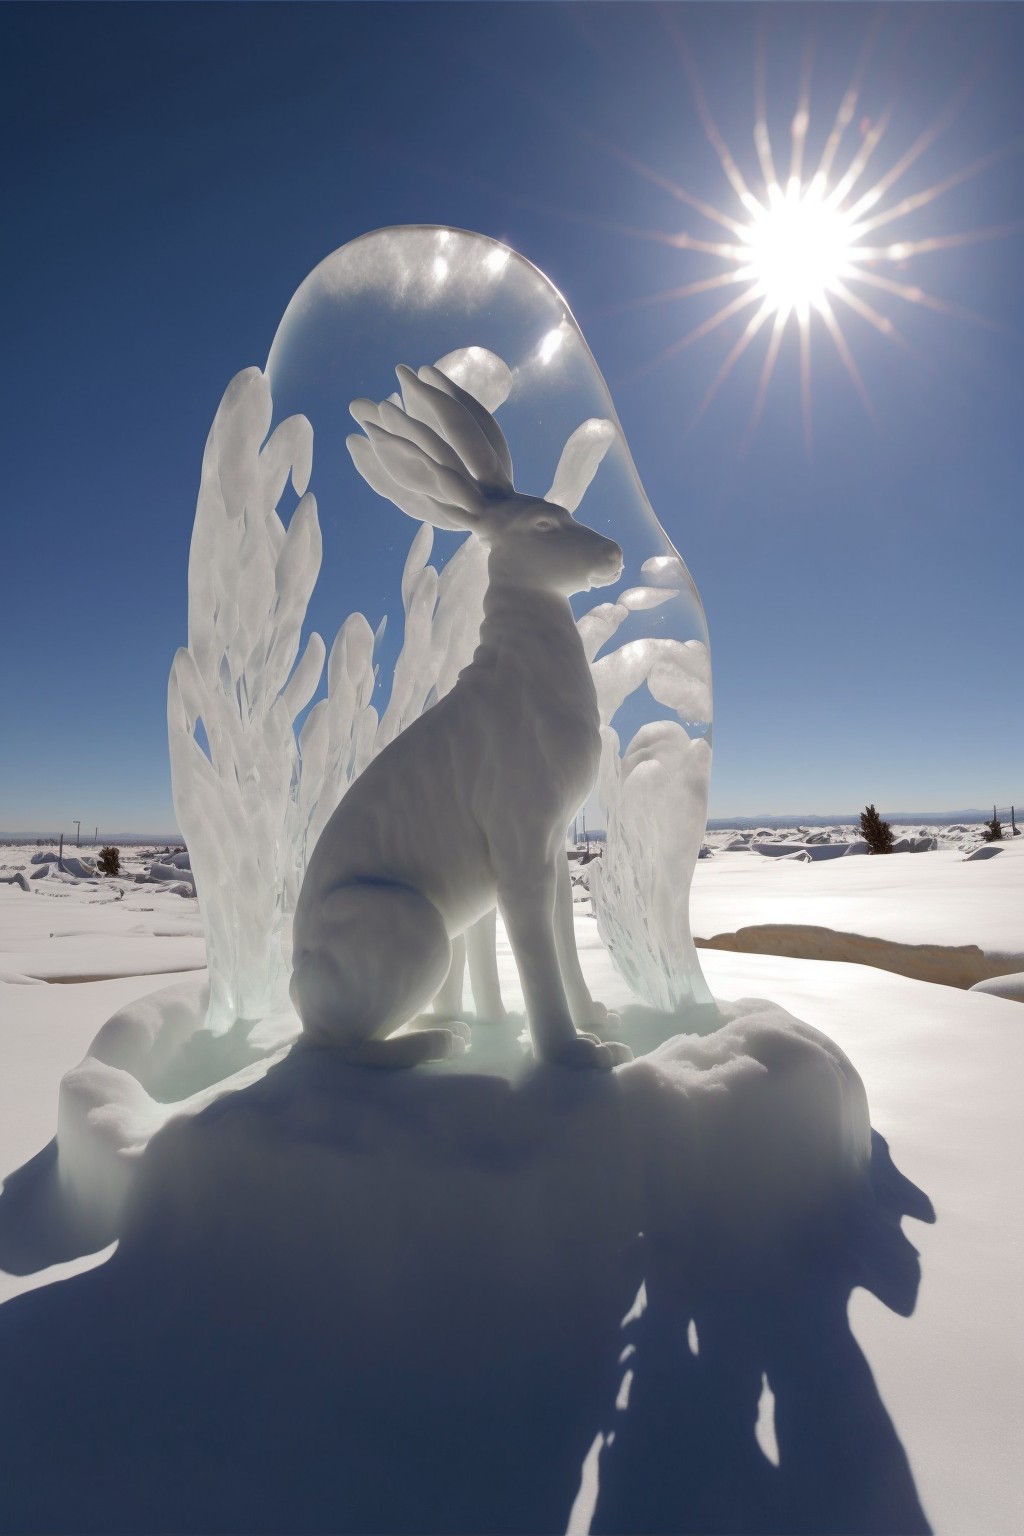 Rabbit sculpture made of ice and snow